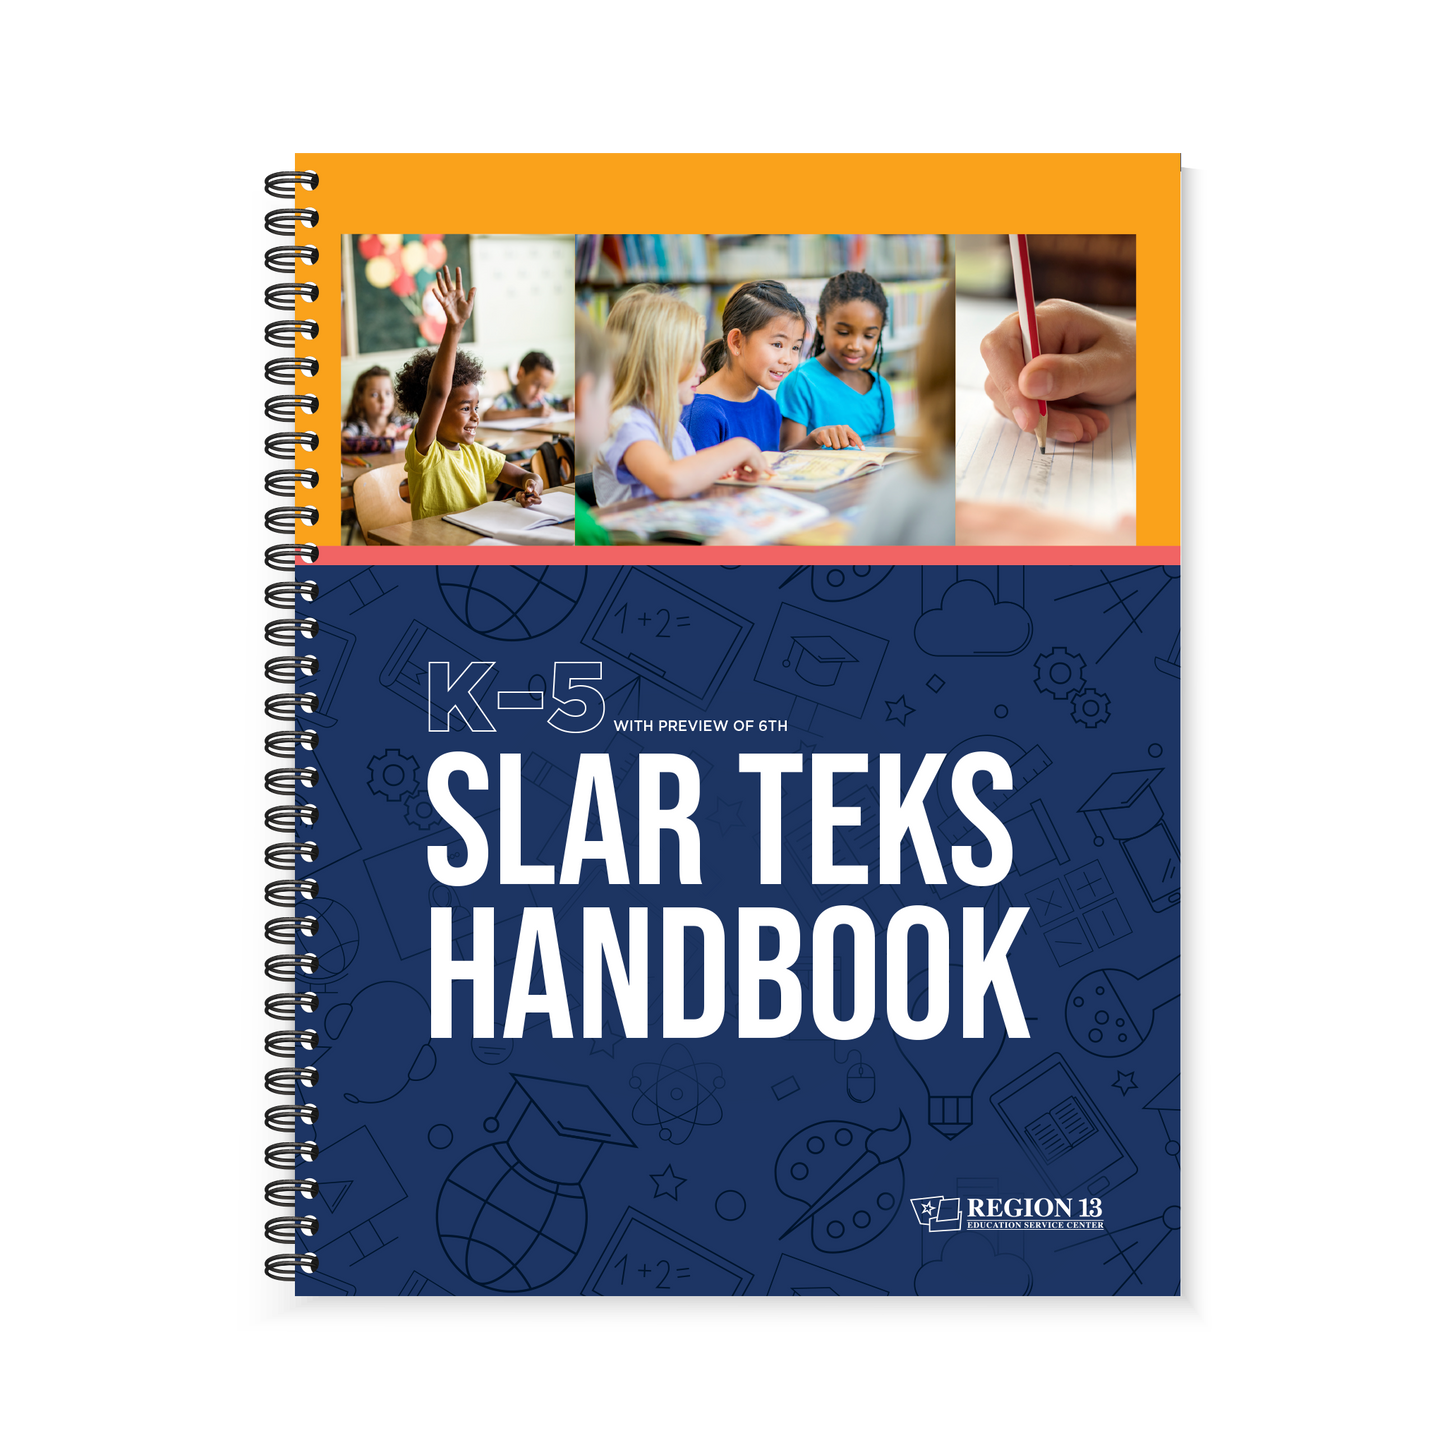 Cover images, one with a kid raising their hand, another with three kids reading a book together, and a third depcition of hand writing on lined paper on the front of the Region 13 SLAR TEKS Handbook: K-5 (Spiral-Bound) book.